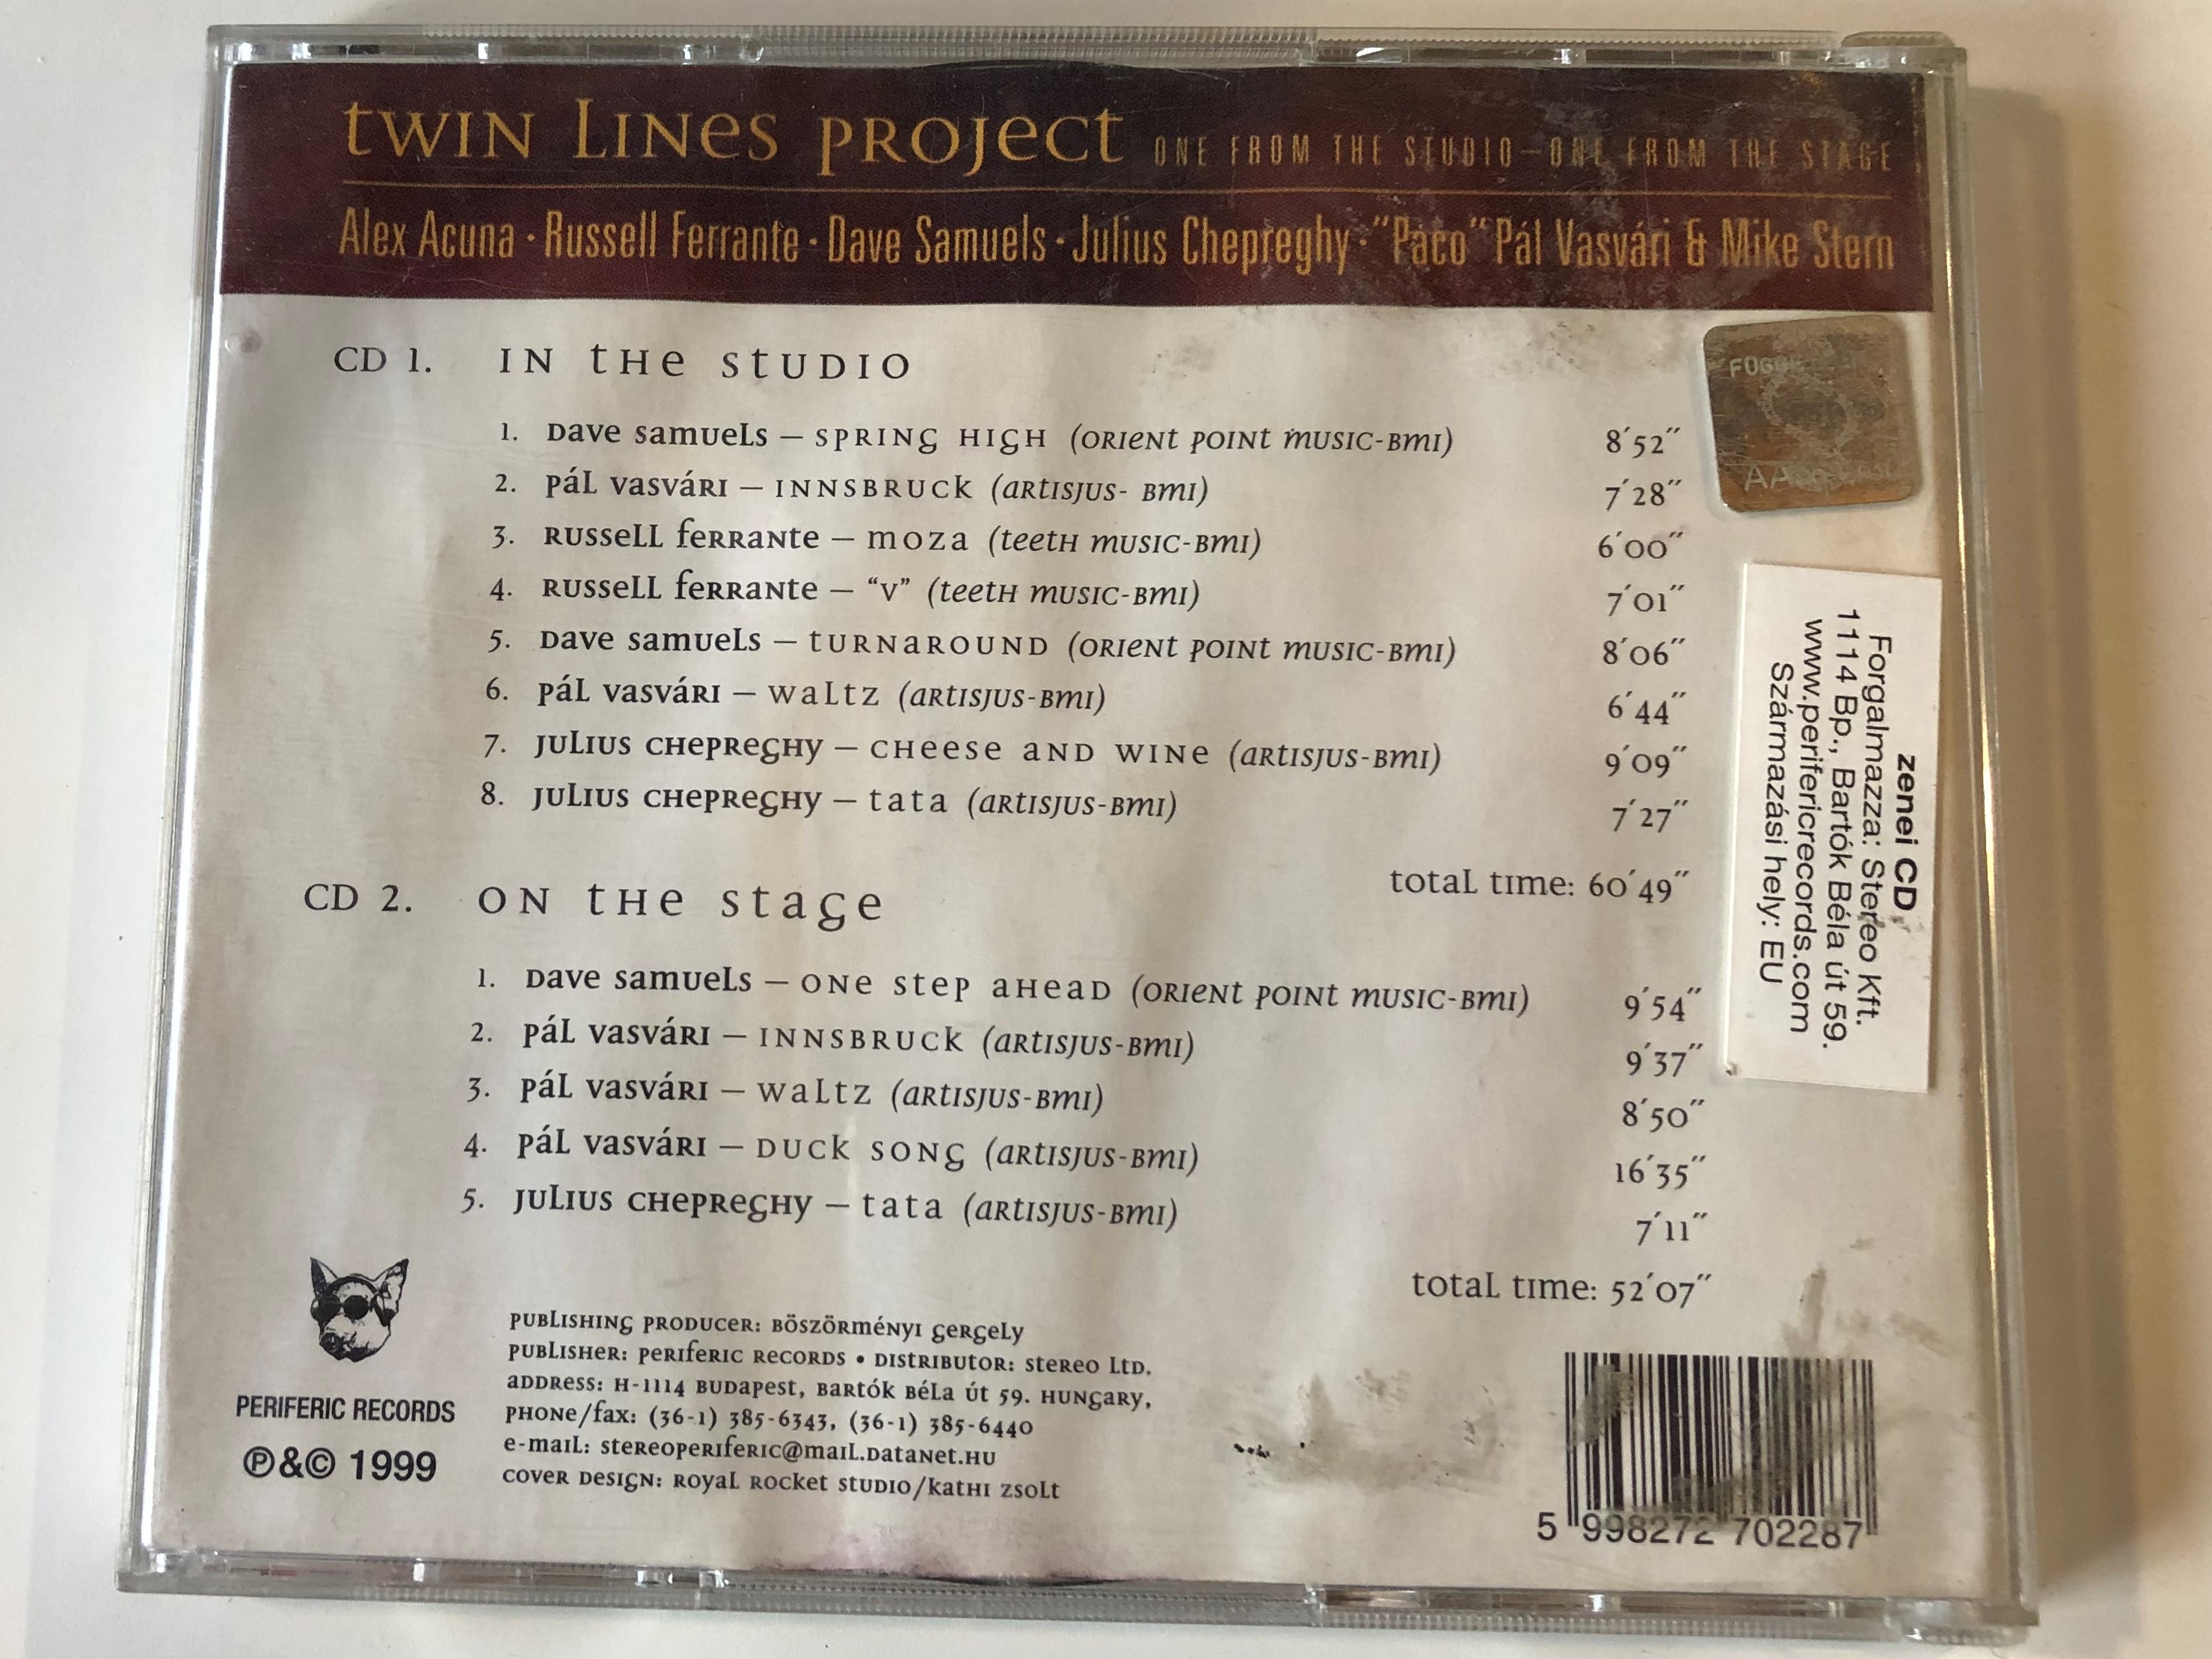 twin-lines-project-one-from-the-studio-one-from-the-stage-alex-acuna-russell-ferrante-dave-samuels-julius-chepreghy-paco-pal-vasvari-mike-stern-periferic-records-2x-audio-cd-19.jpg